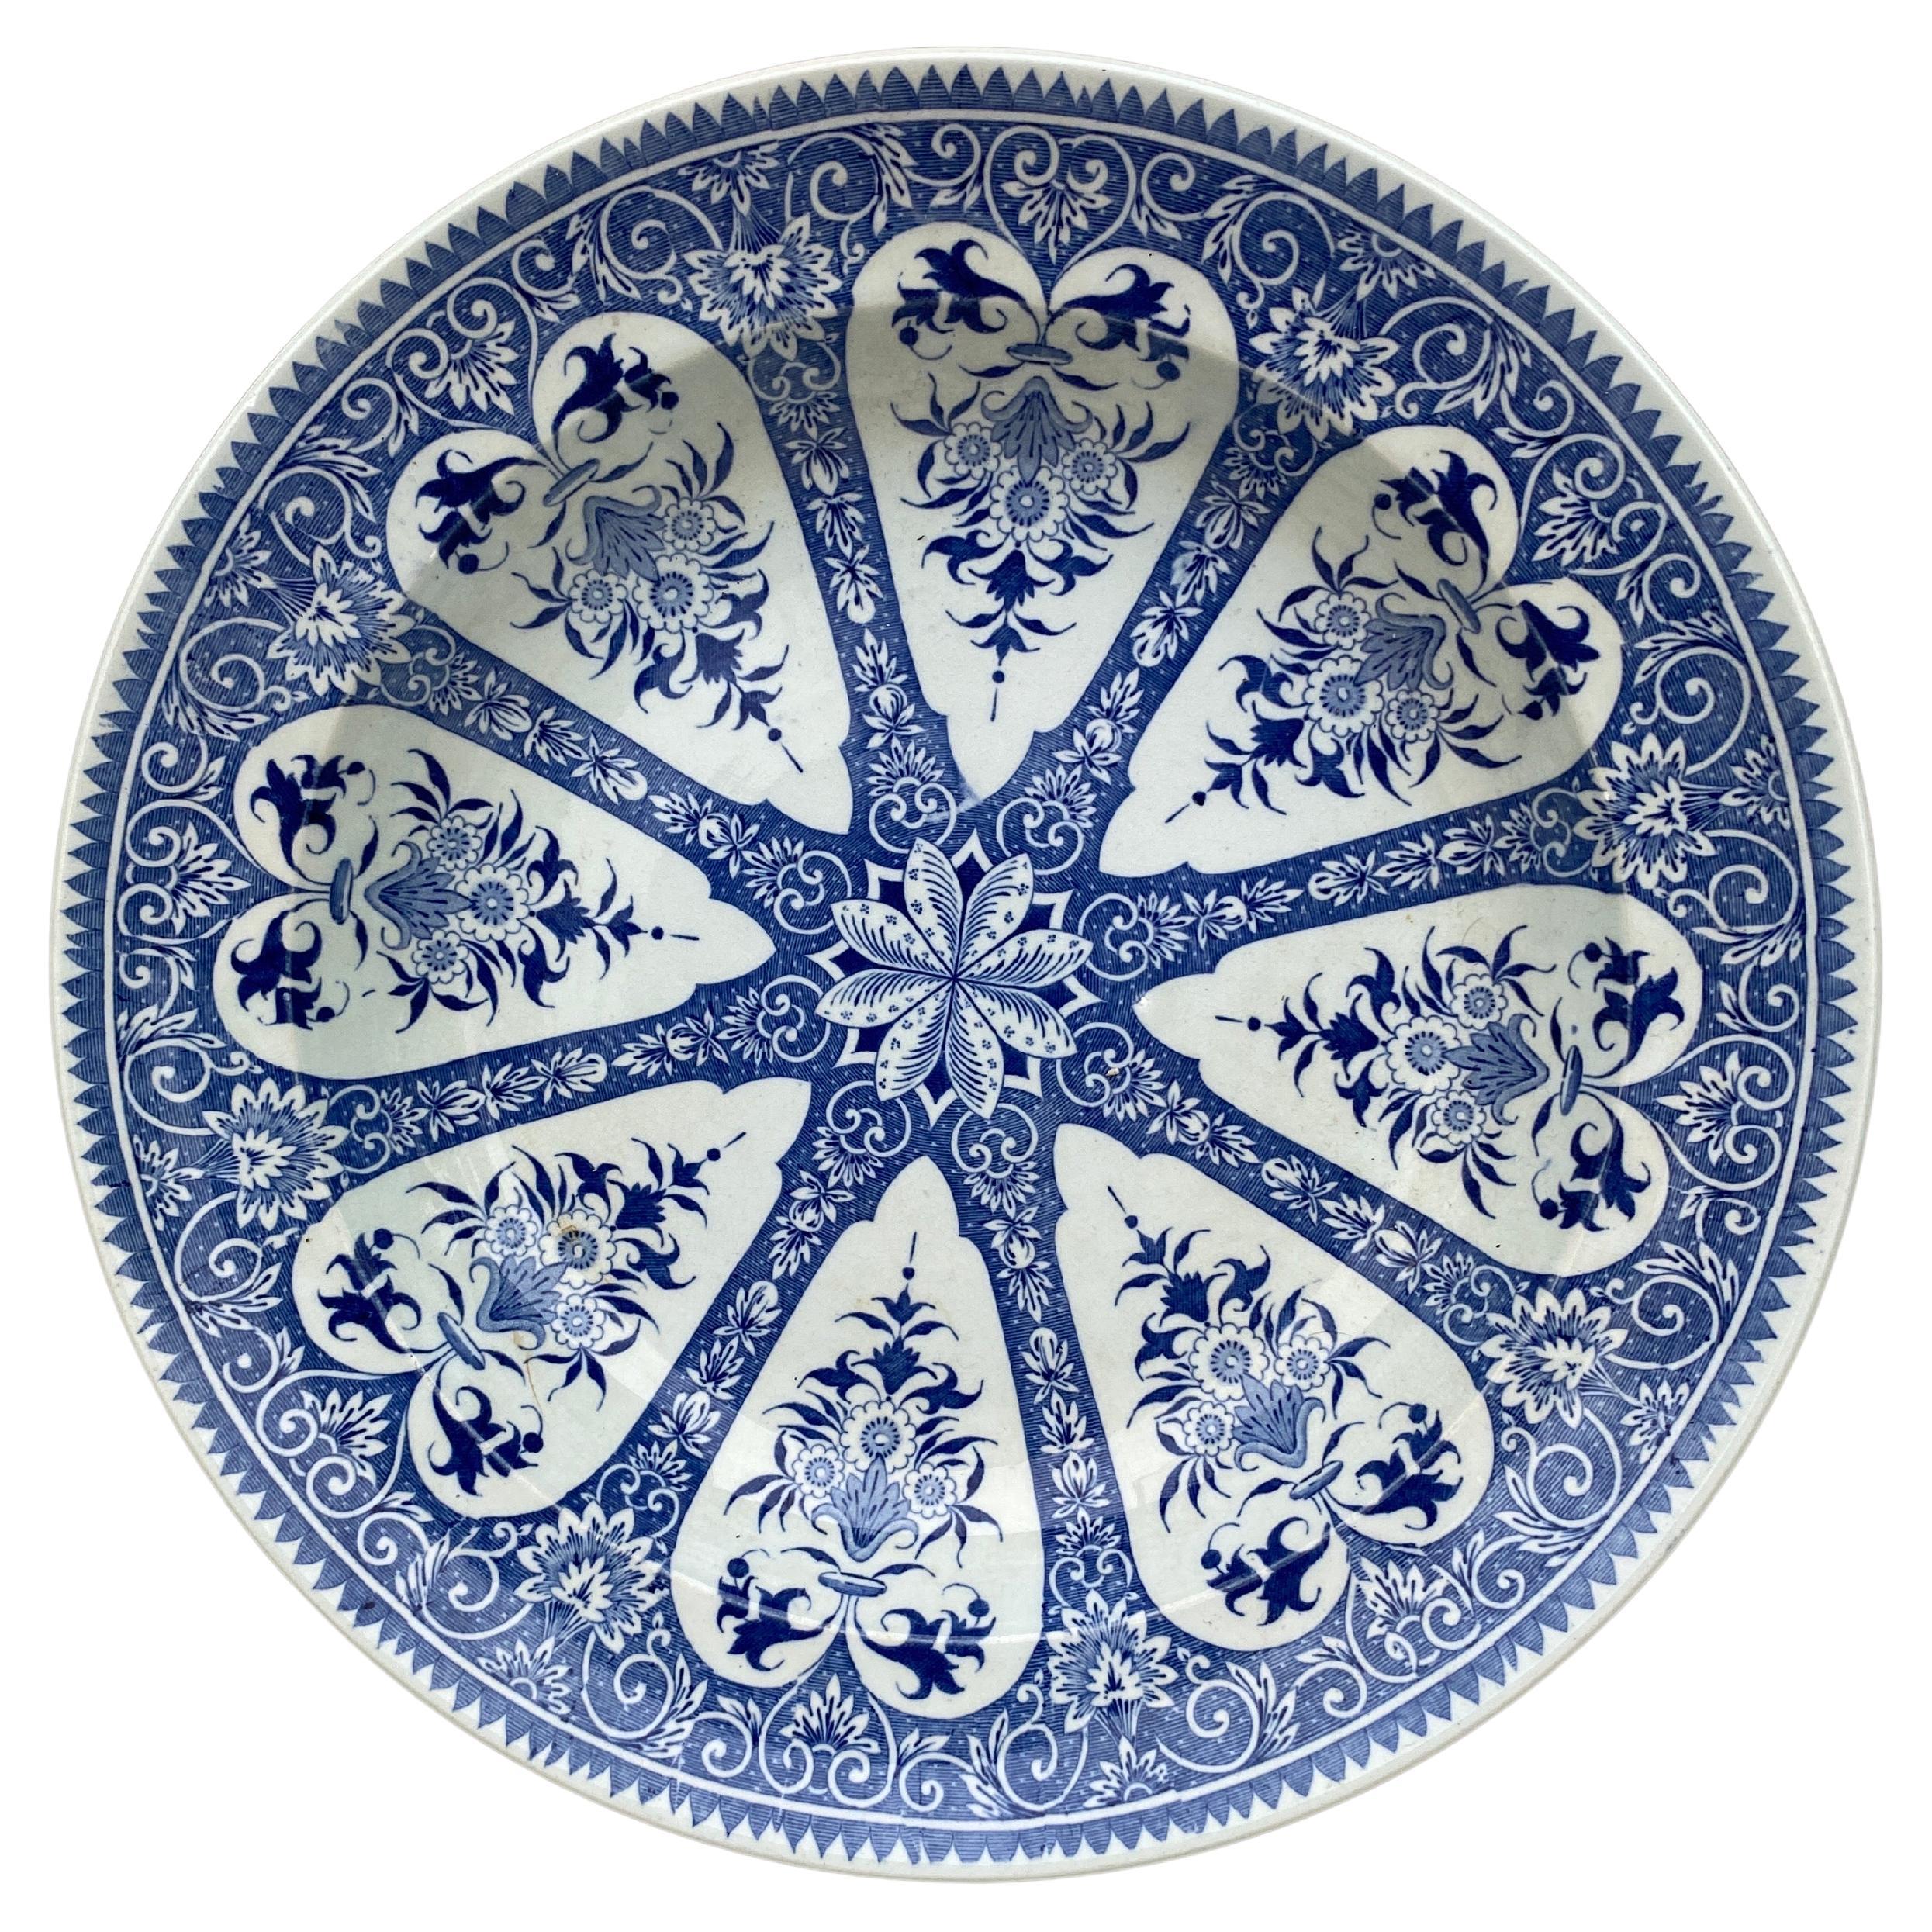 19th Century French Blue & White Faience Soup Plate Sarreguemines